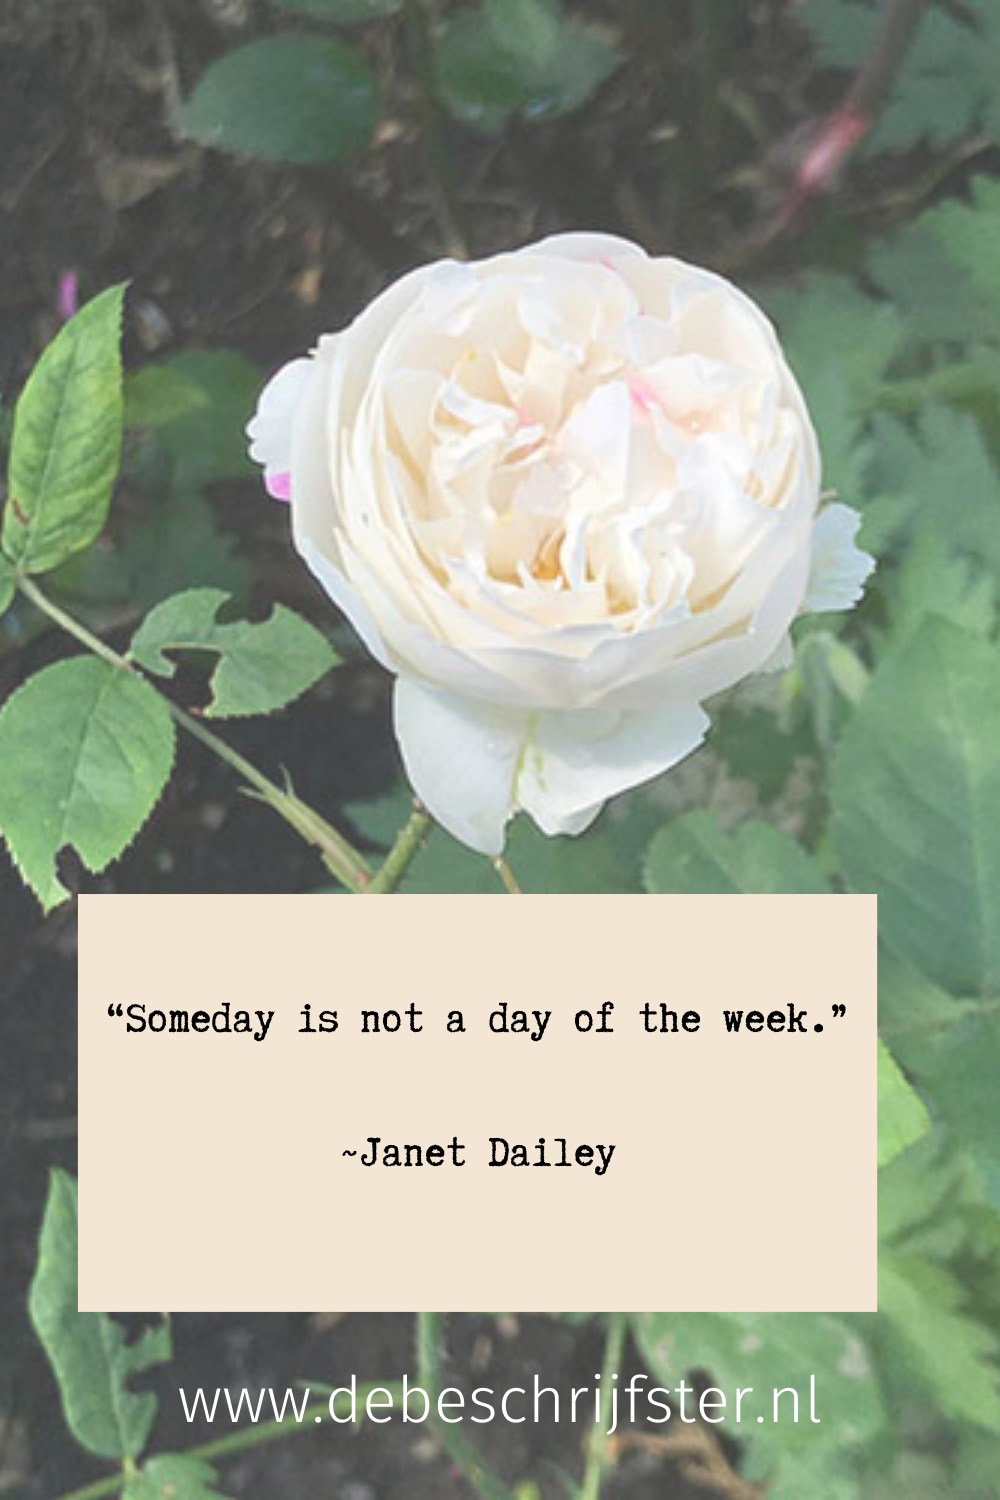 ‘Someday is NOT a day of the week.’ Janet Dailey